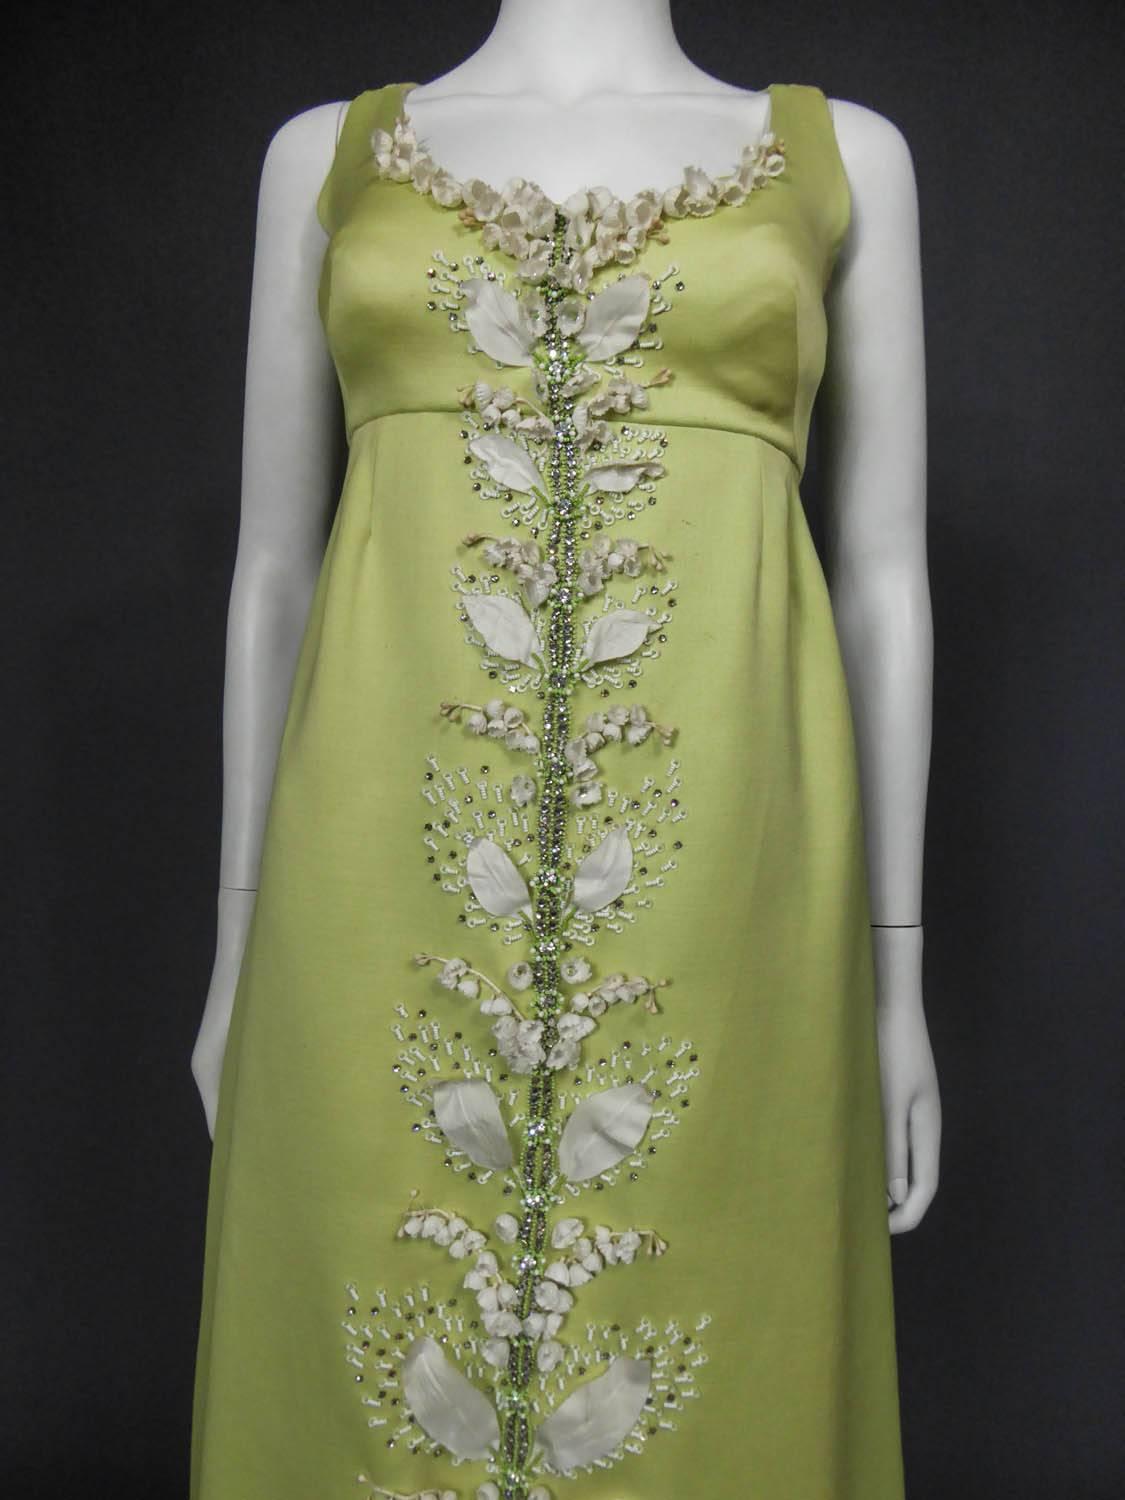 Circa 1965

Italy

Evening dress Tati in Celadon green gazar embroidered with lily of the valley from Milan in the 60s. High waist inspired by the First Empire. Low-cut neckline, the dress closes in the back with two panels decorated with a large